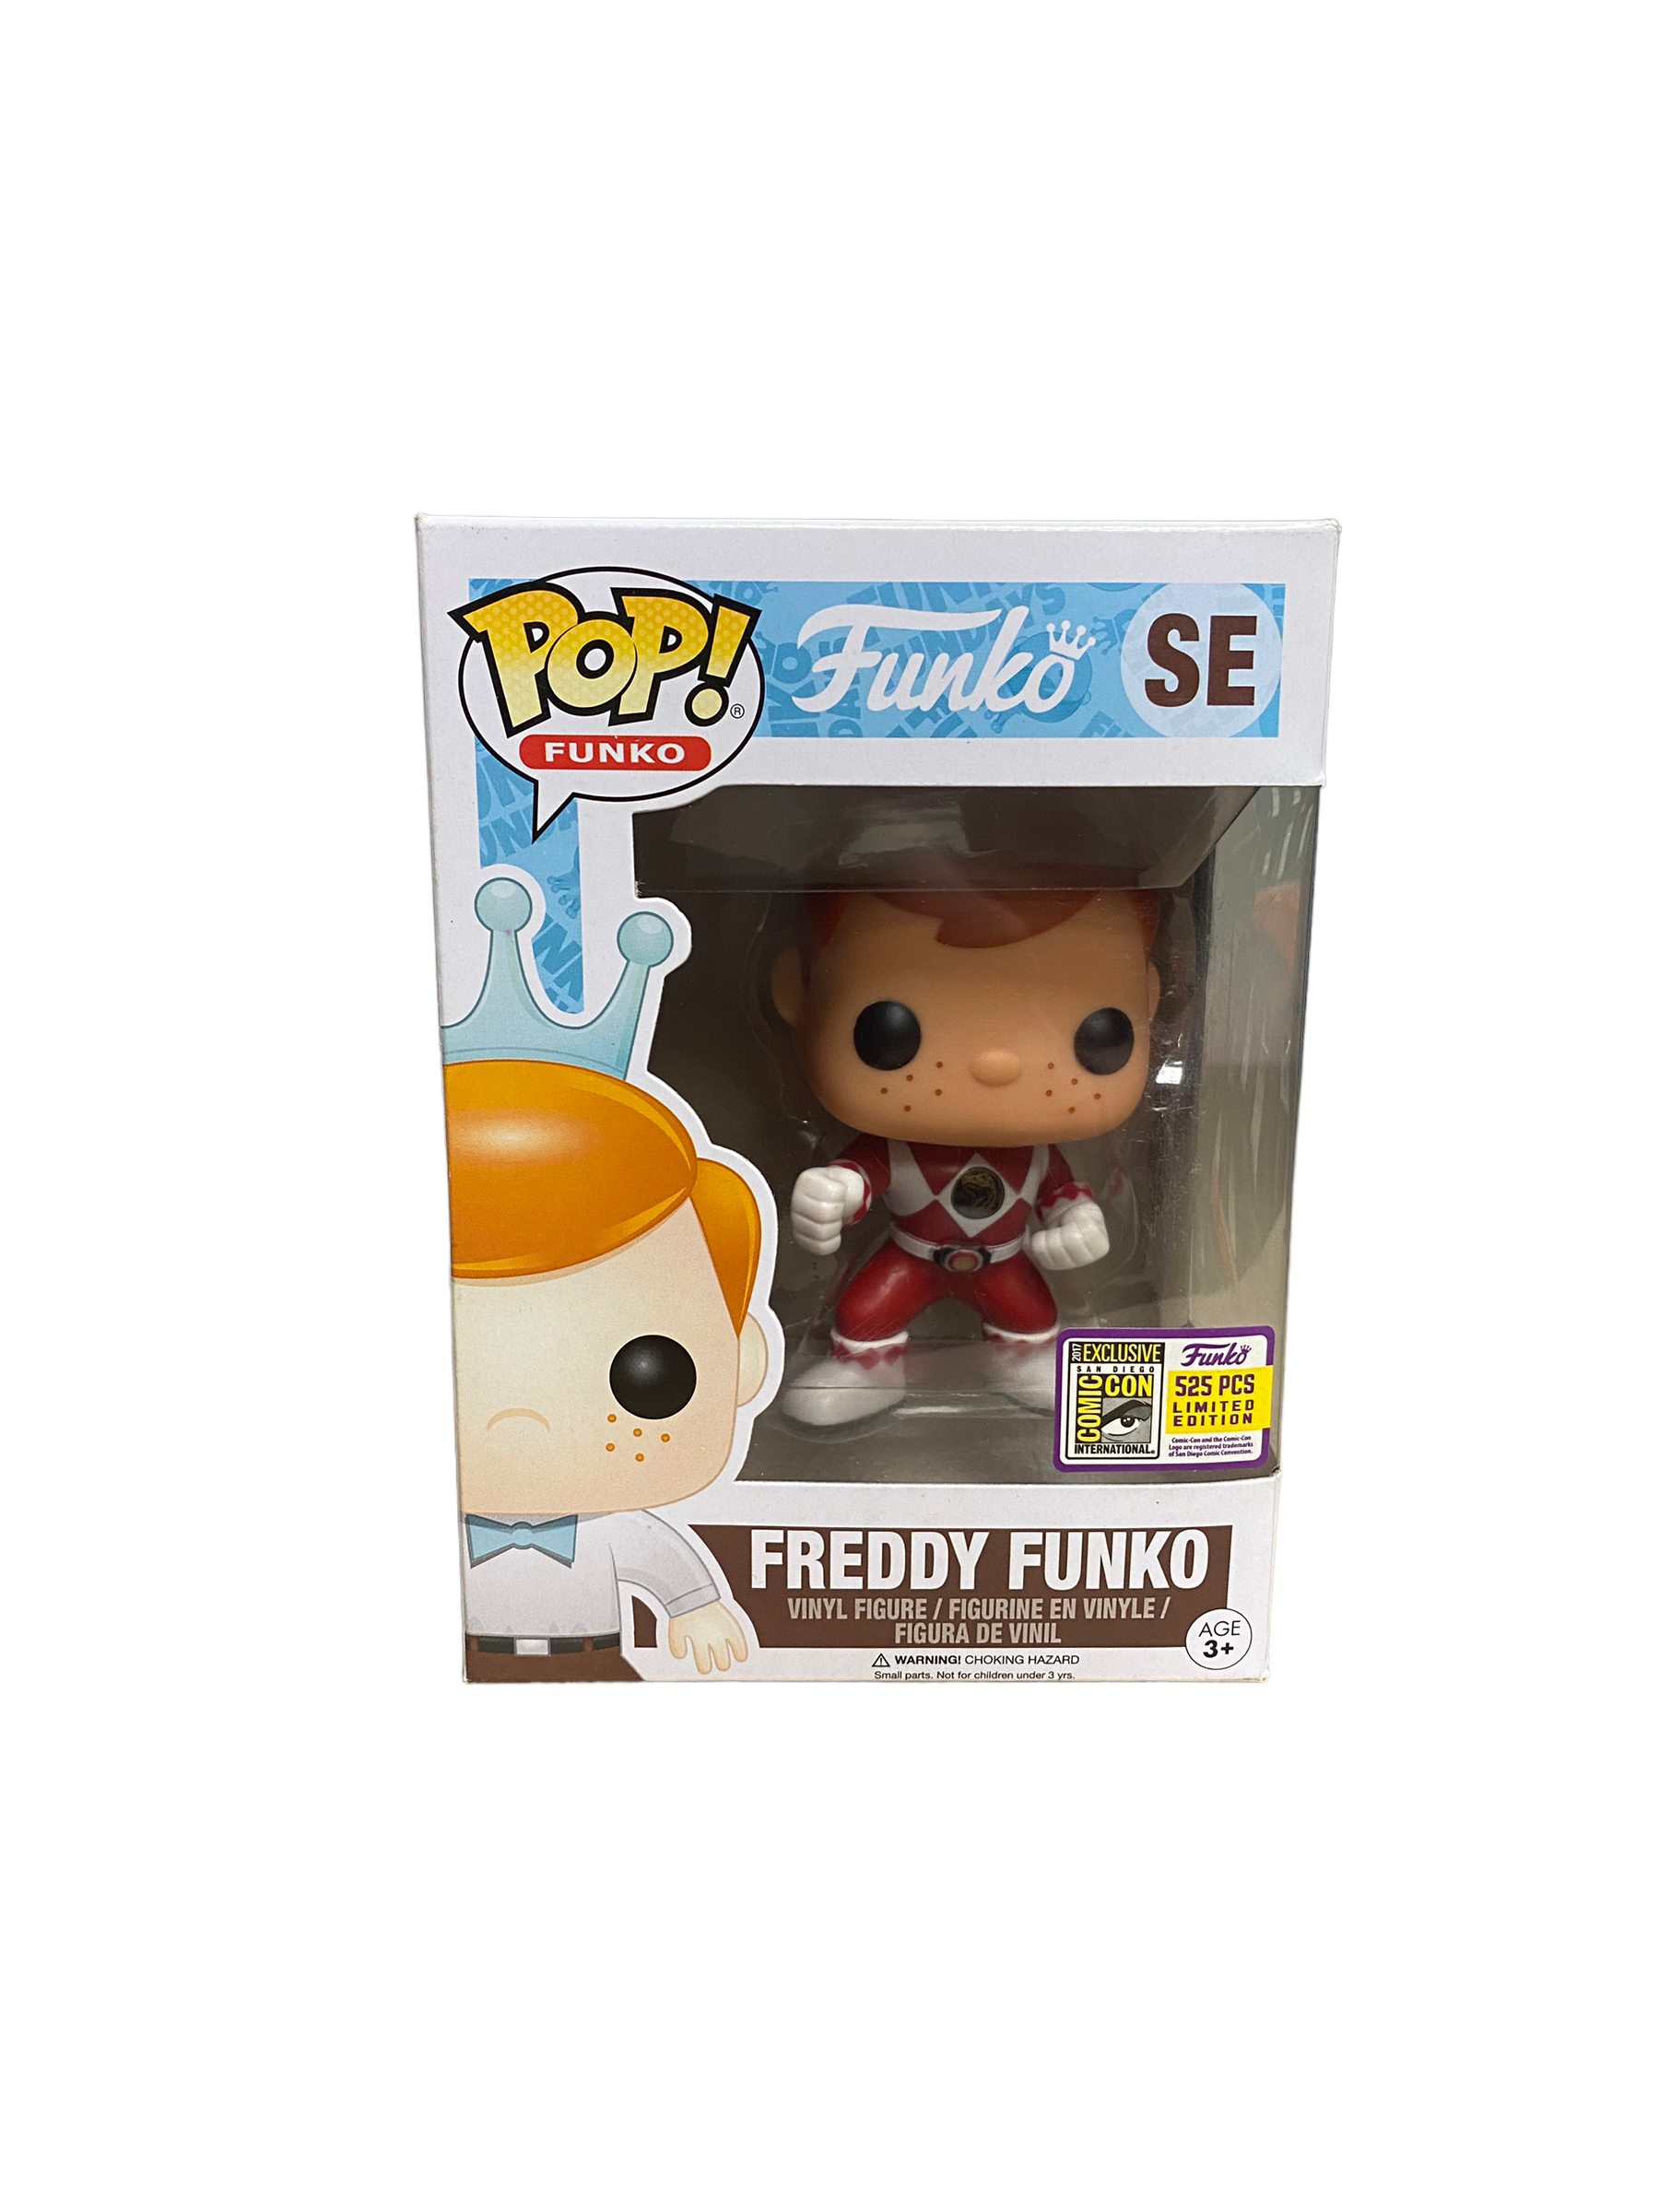 Freddy Funko as Red Ranger Funko Pop! - SDCC 2017 Exclusive LE525 Pcs - Condition 8.5/10